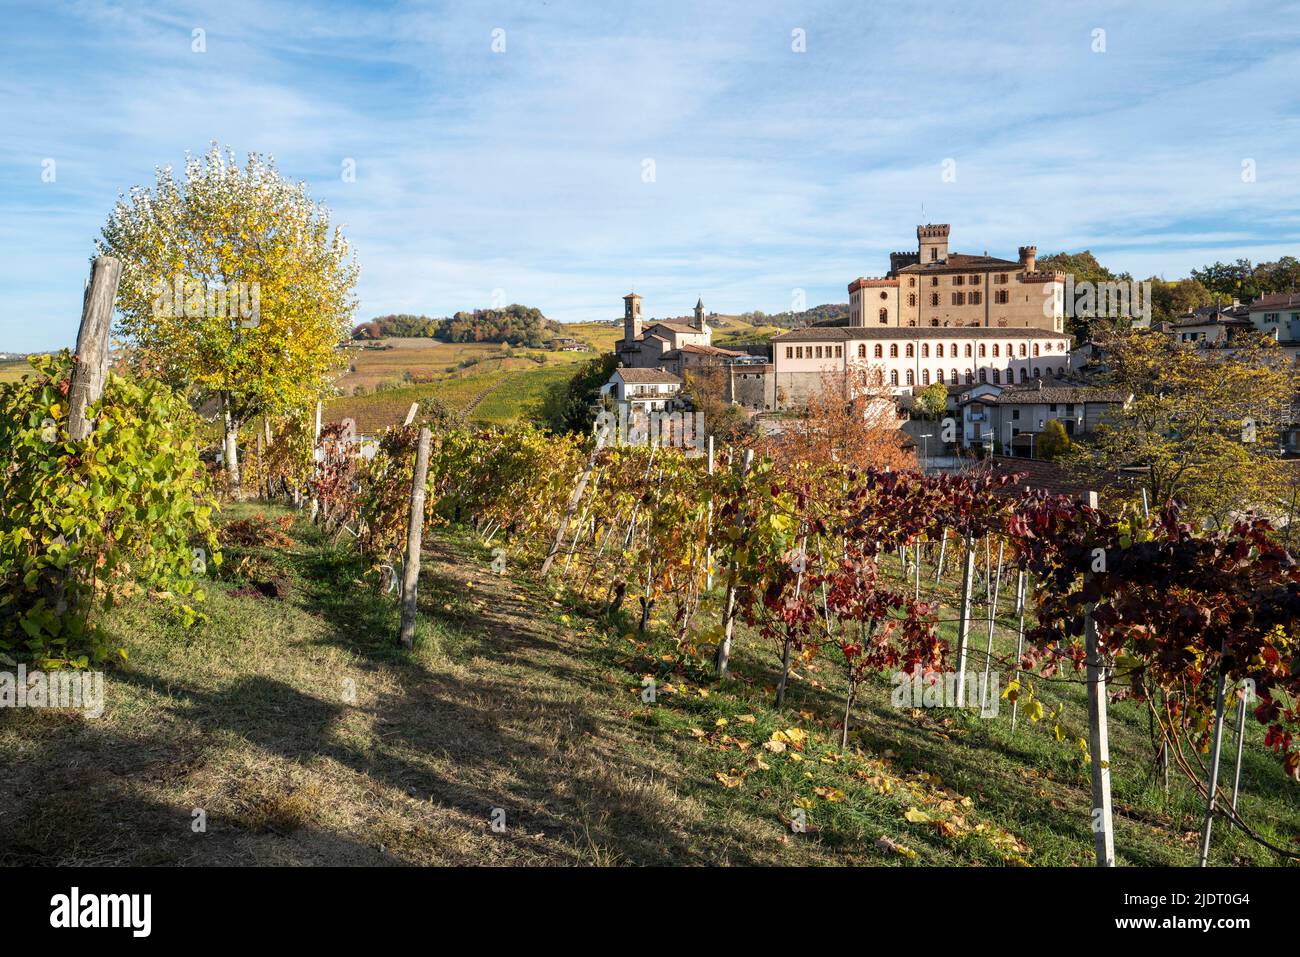 A vineyard on the outskirts of Barolo, Cuneo, Piedmonte with the village of Barolo in the background Stock Photo